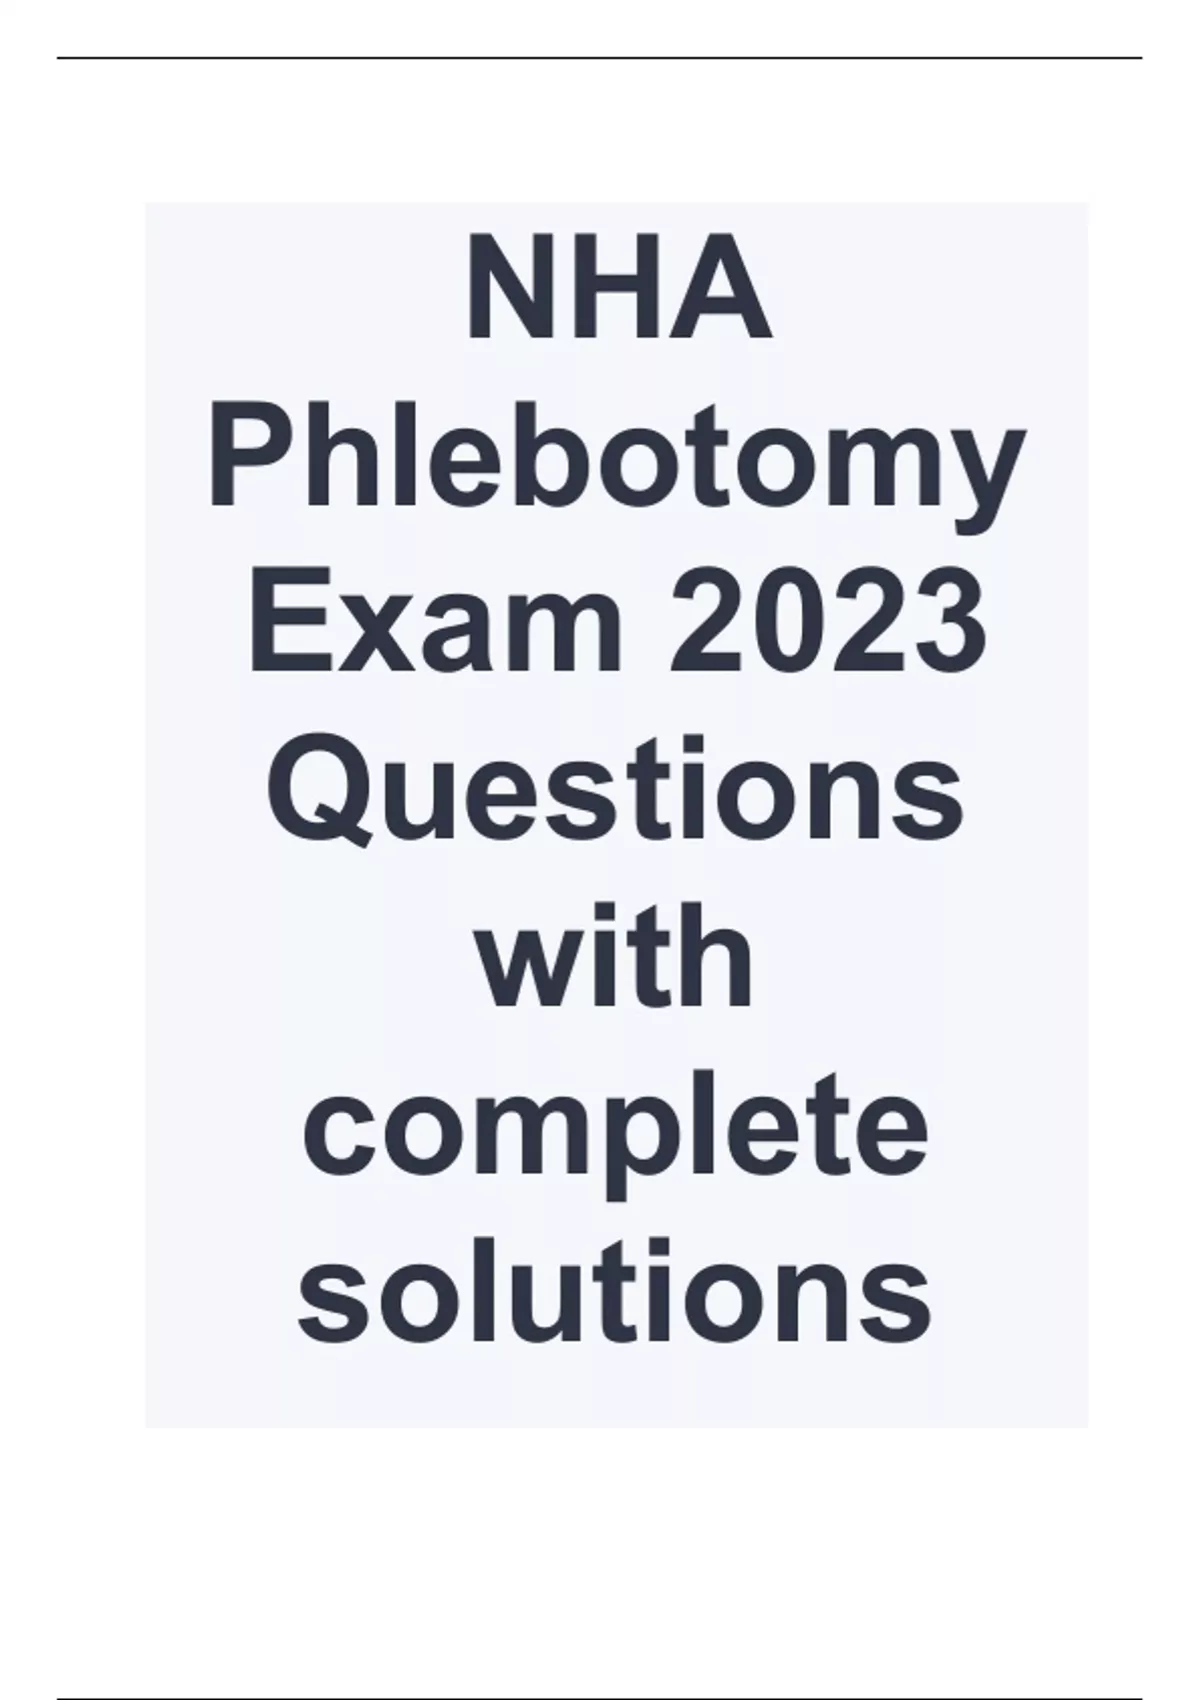 NHA Phlebotomy Exam 2023 Questions with complete solutions Nha